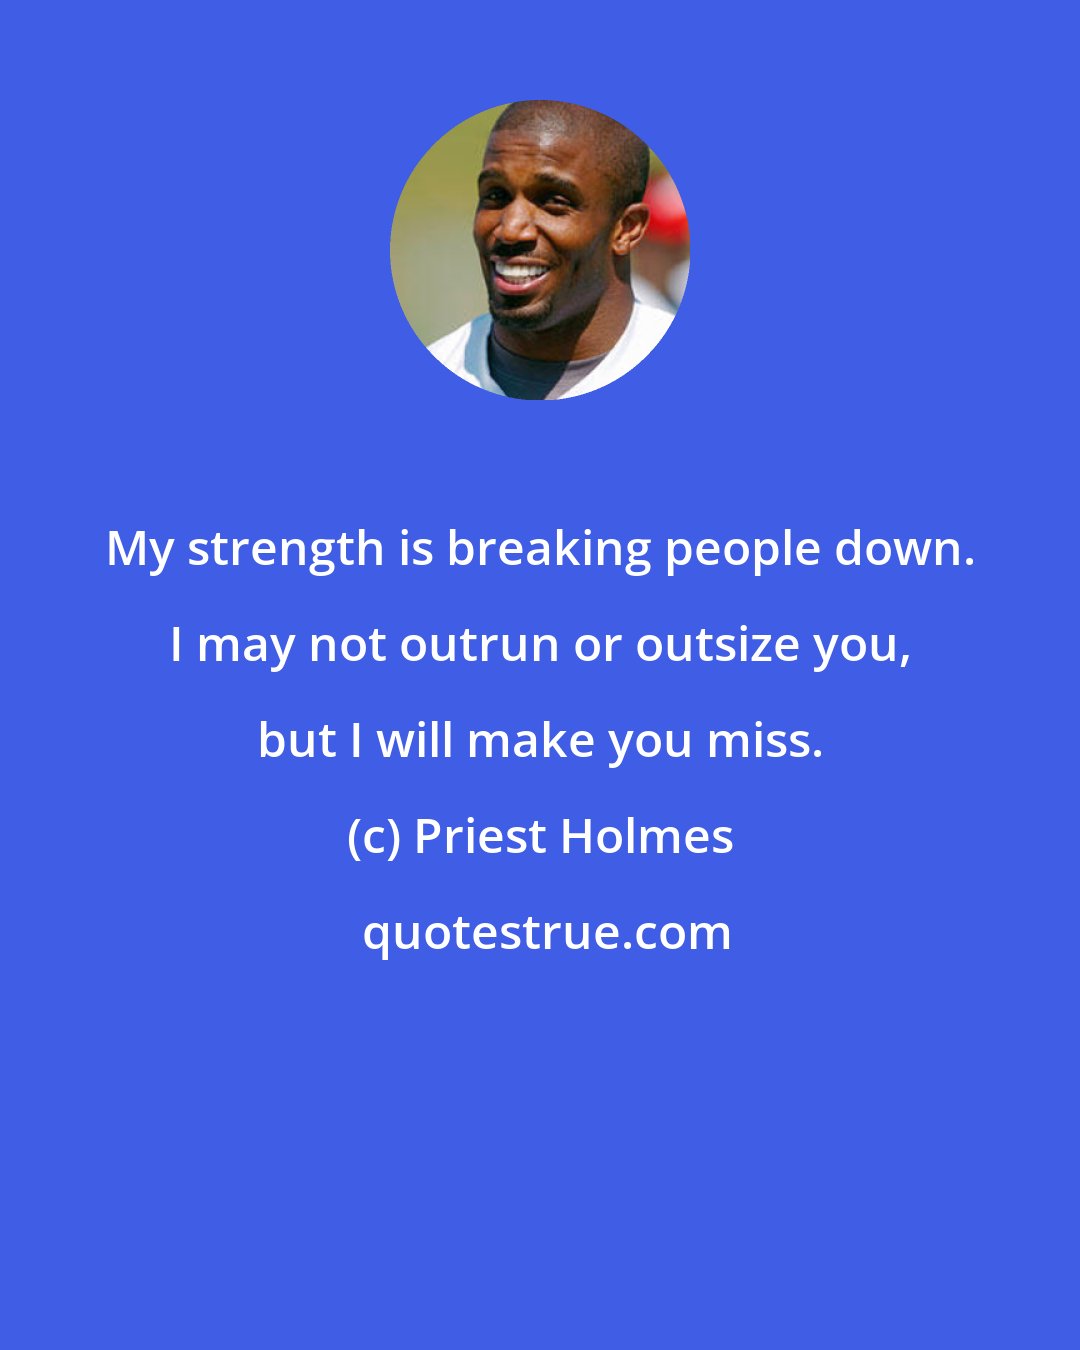 Priest Holmes: My strength is breaking people down. I may not outrun or outsize you, but I will make you miss.